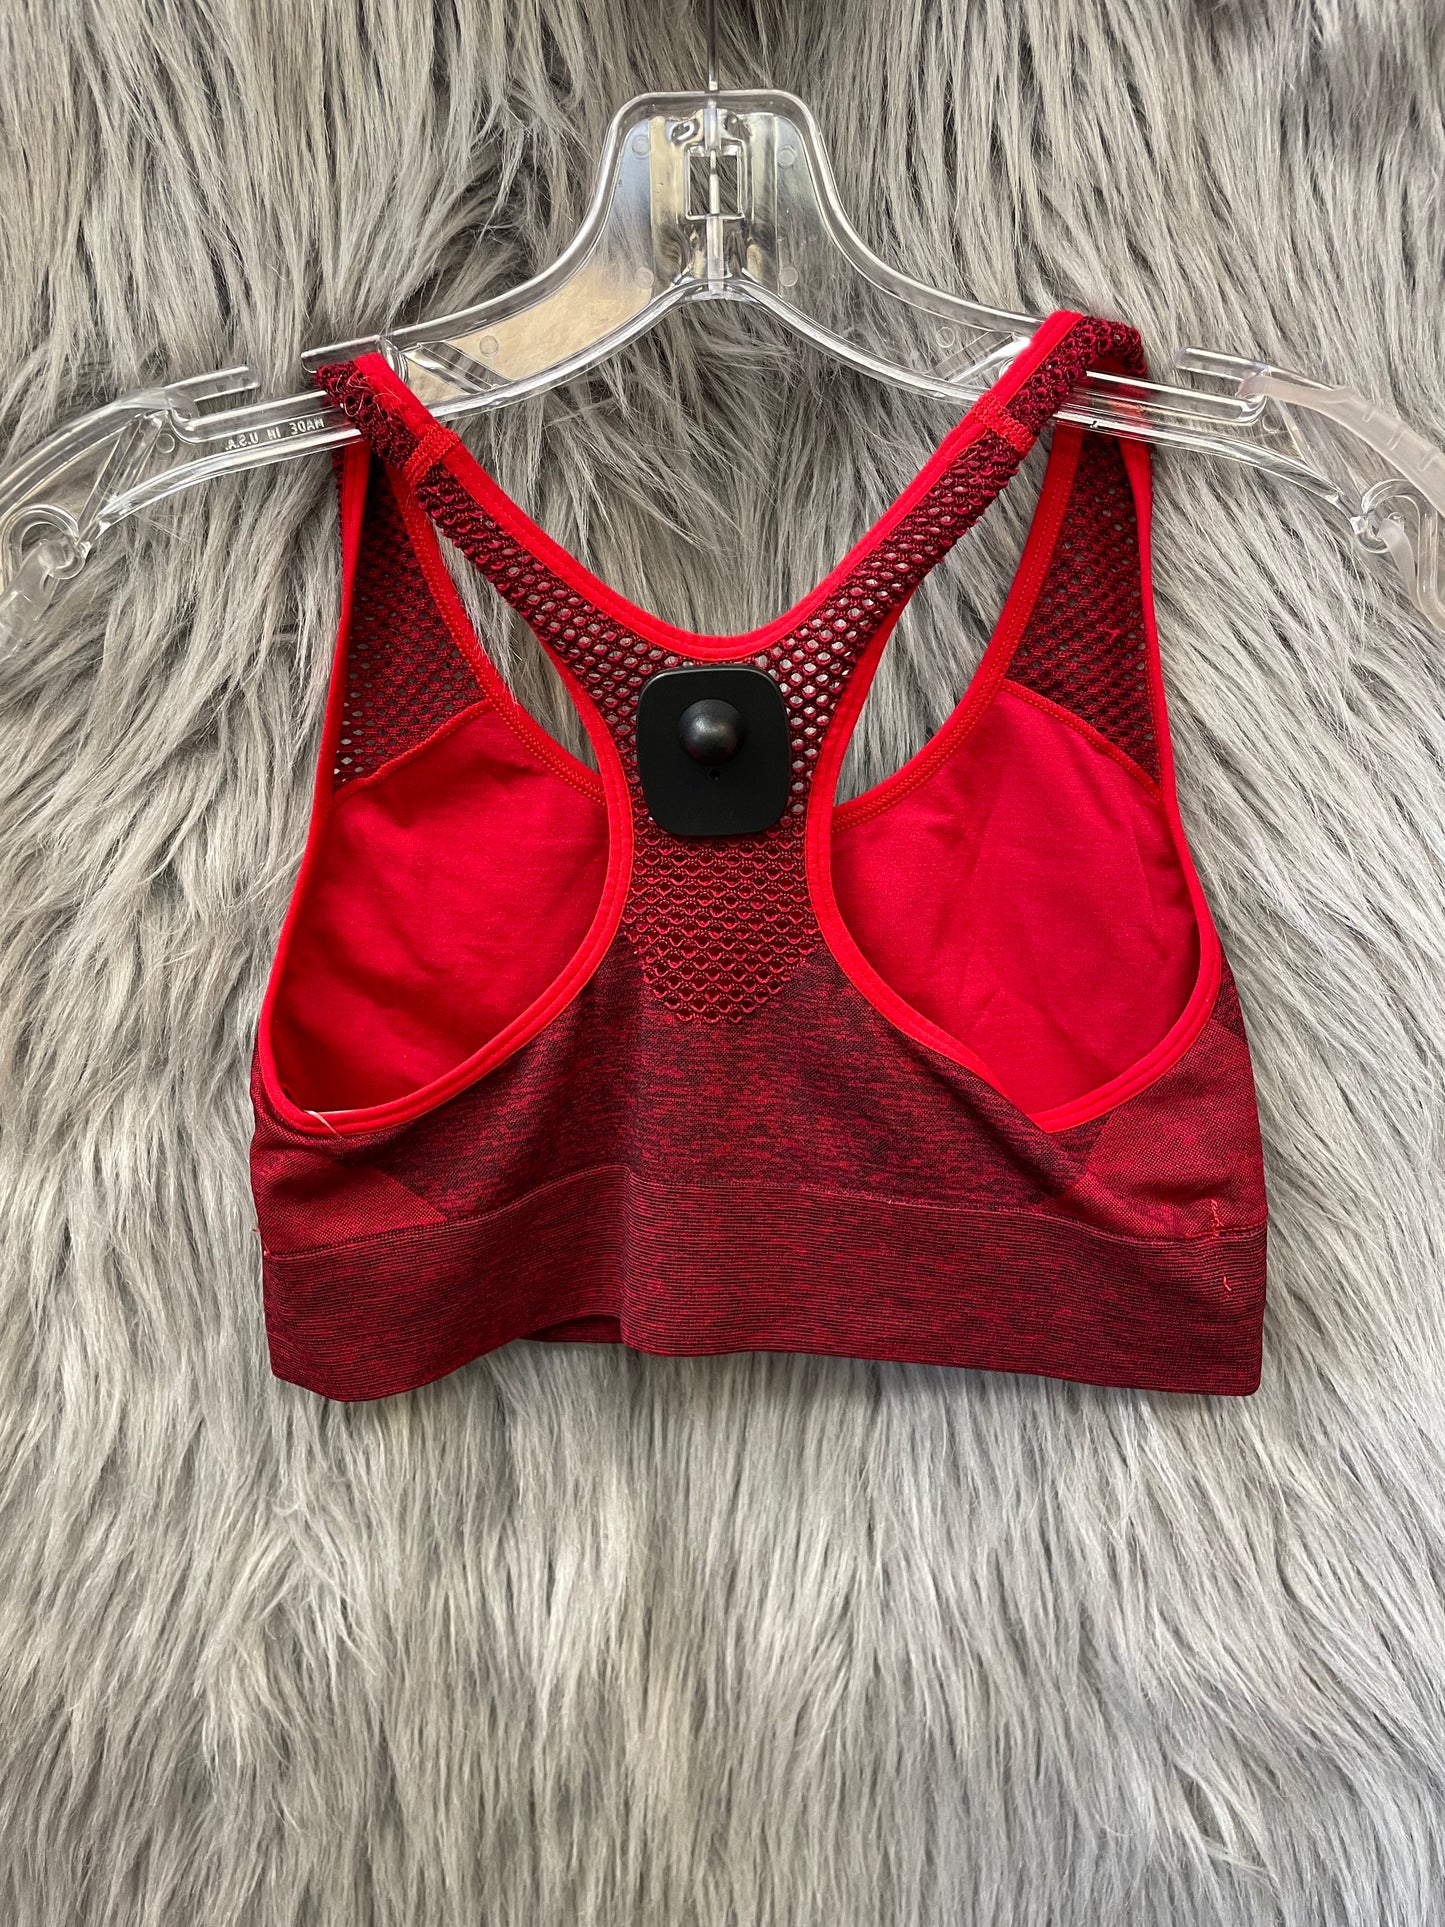 Athletic Bra By Pink  Size: S